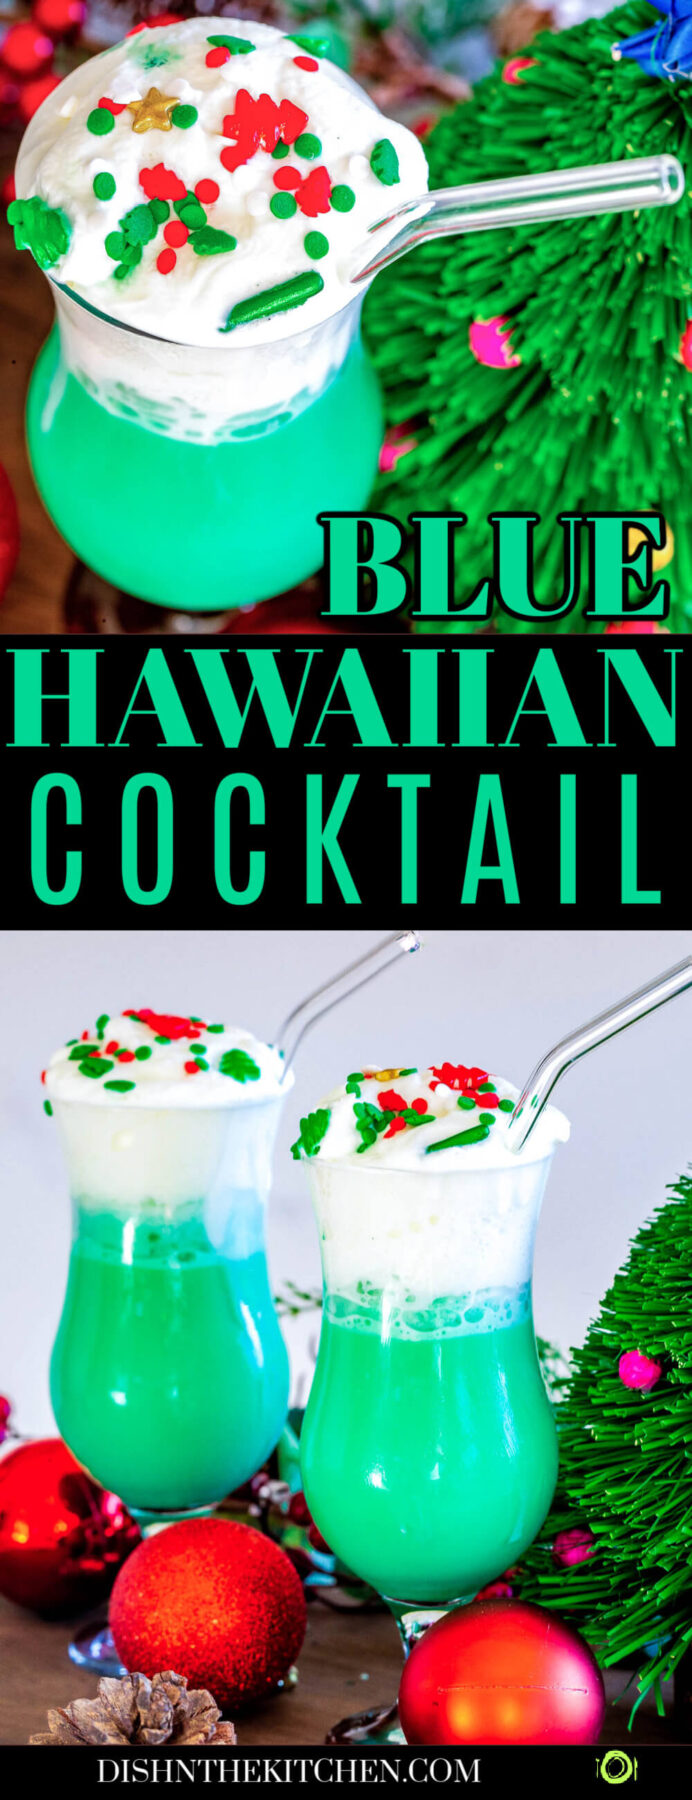 Pinterest image featuring hurricane glasses filled with blue hawaiian cocktail topped with whipped cream and christmas sprinkles.